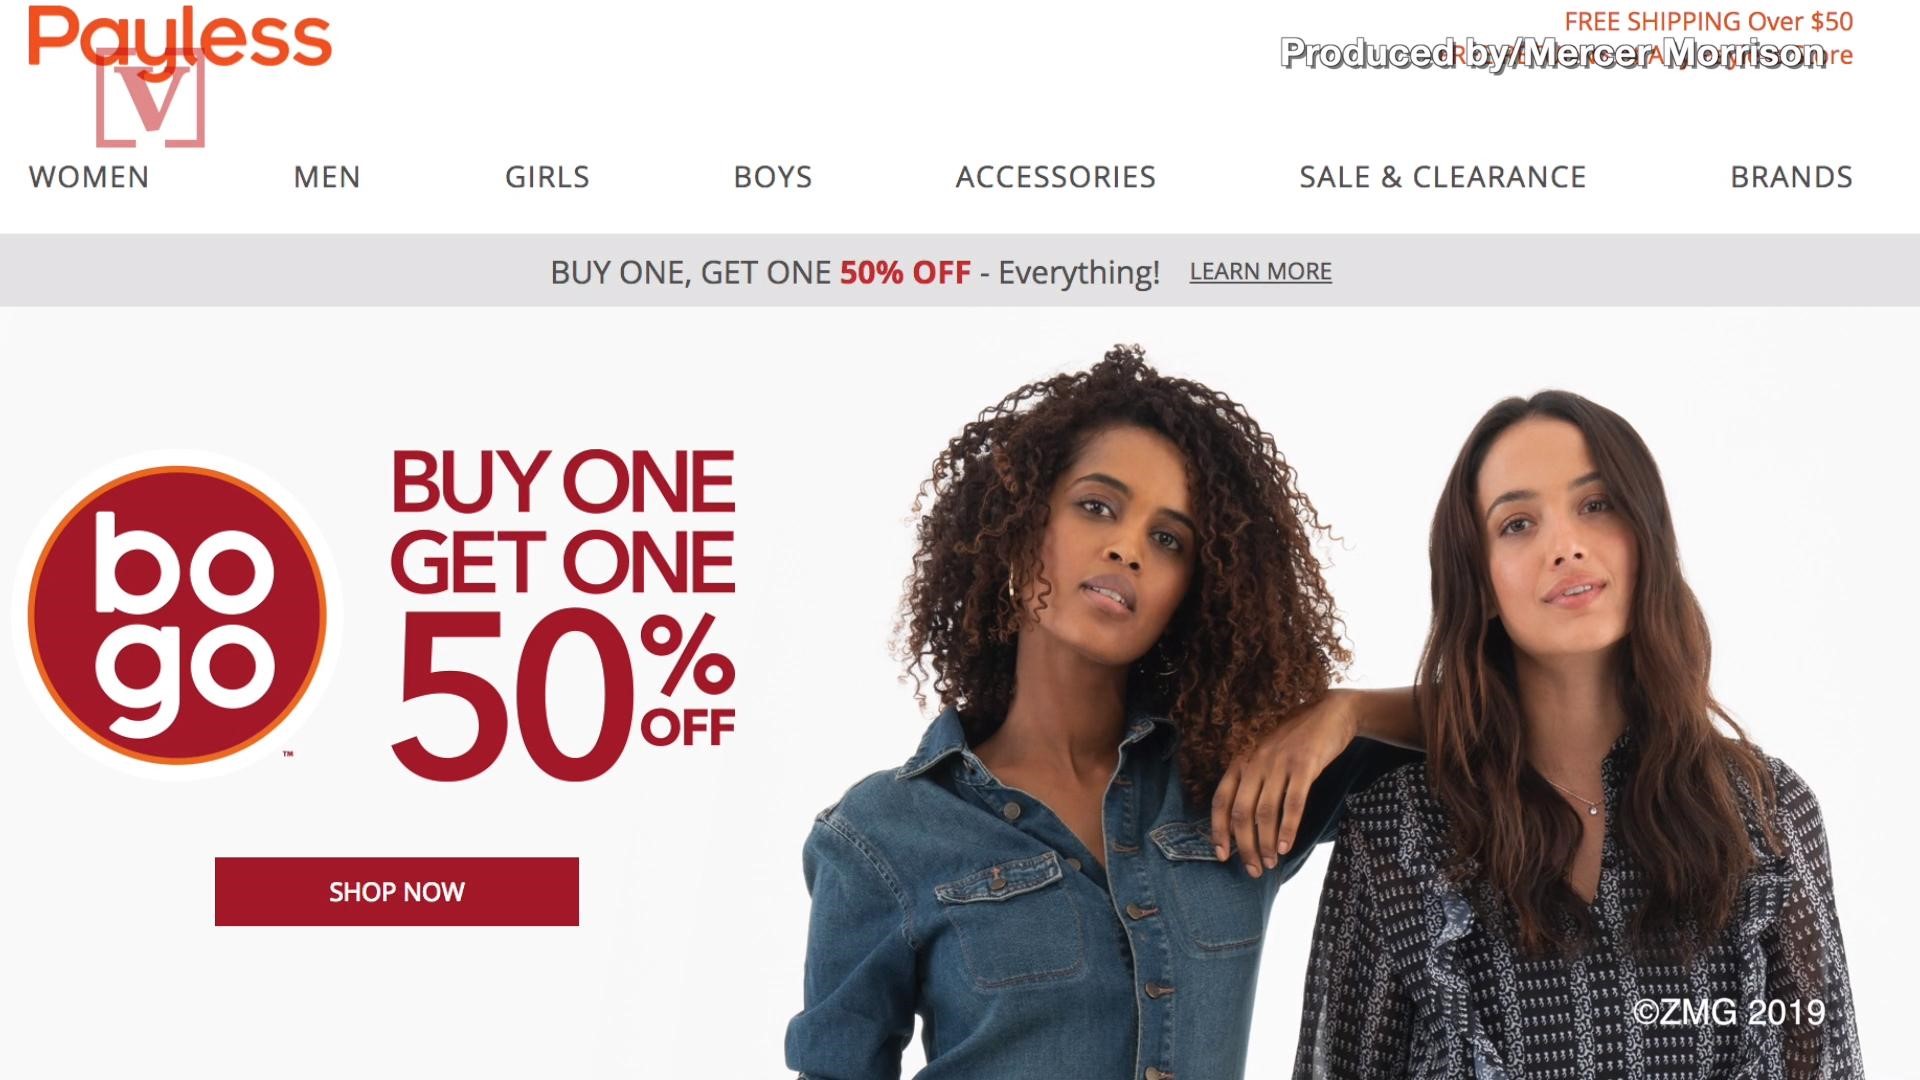 Payless ShoeSource to shutter all of 